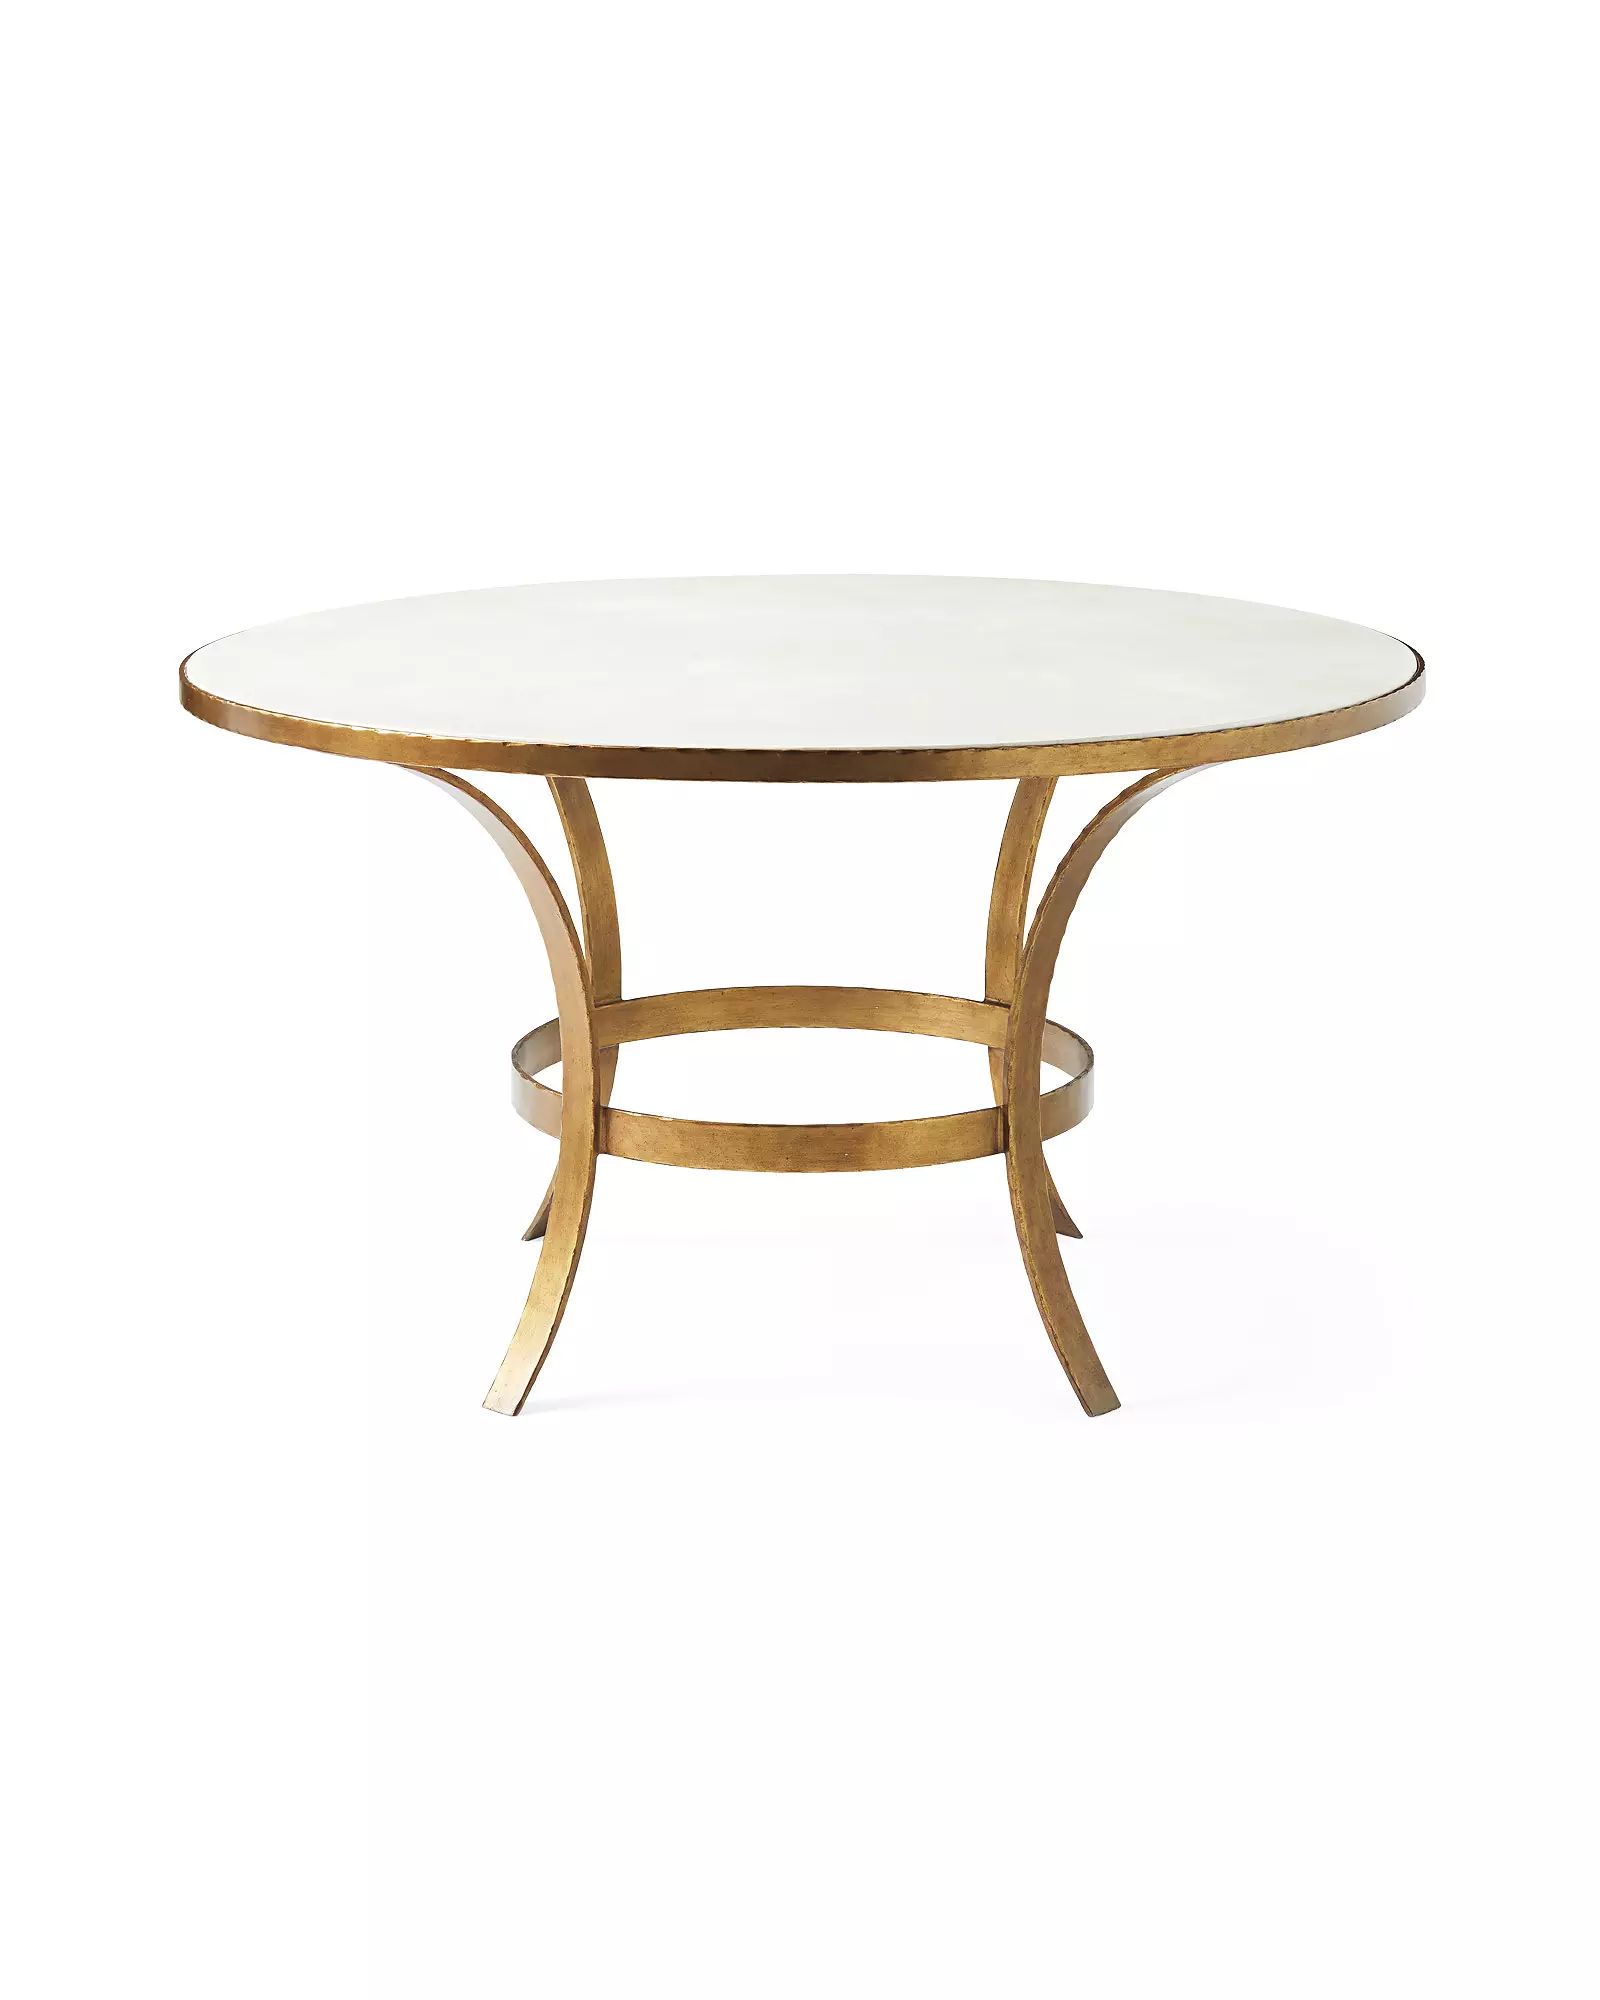 St. Germain Stone Dining Table | Serena and Lily